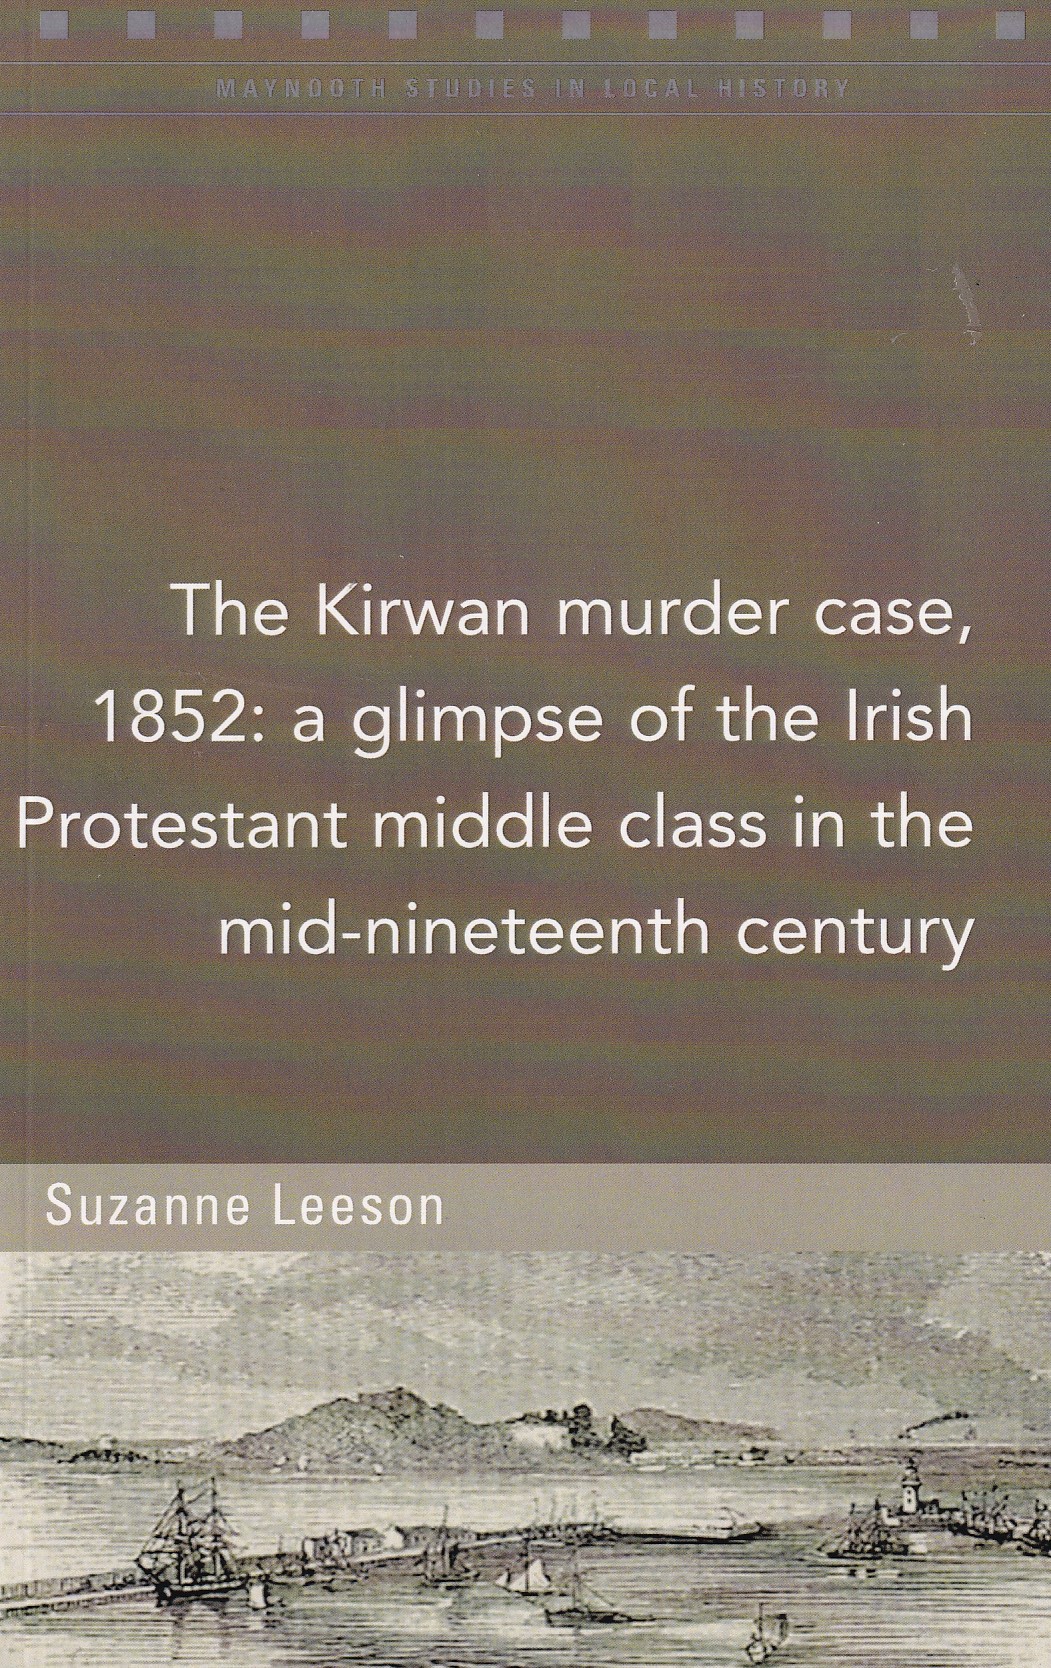 The Kirwan murder case, 1852: A glimpse of the Irish Protestant middle class in the mid-nineteenth century (Maynooth Studies in Local History) by Suzanne Leeson